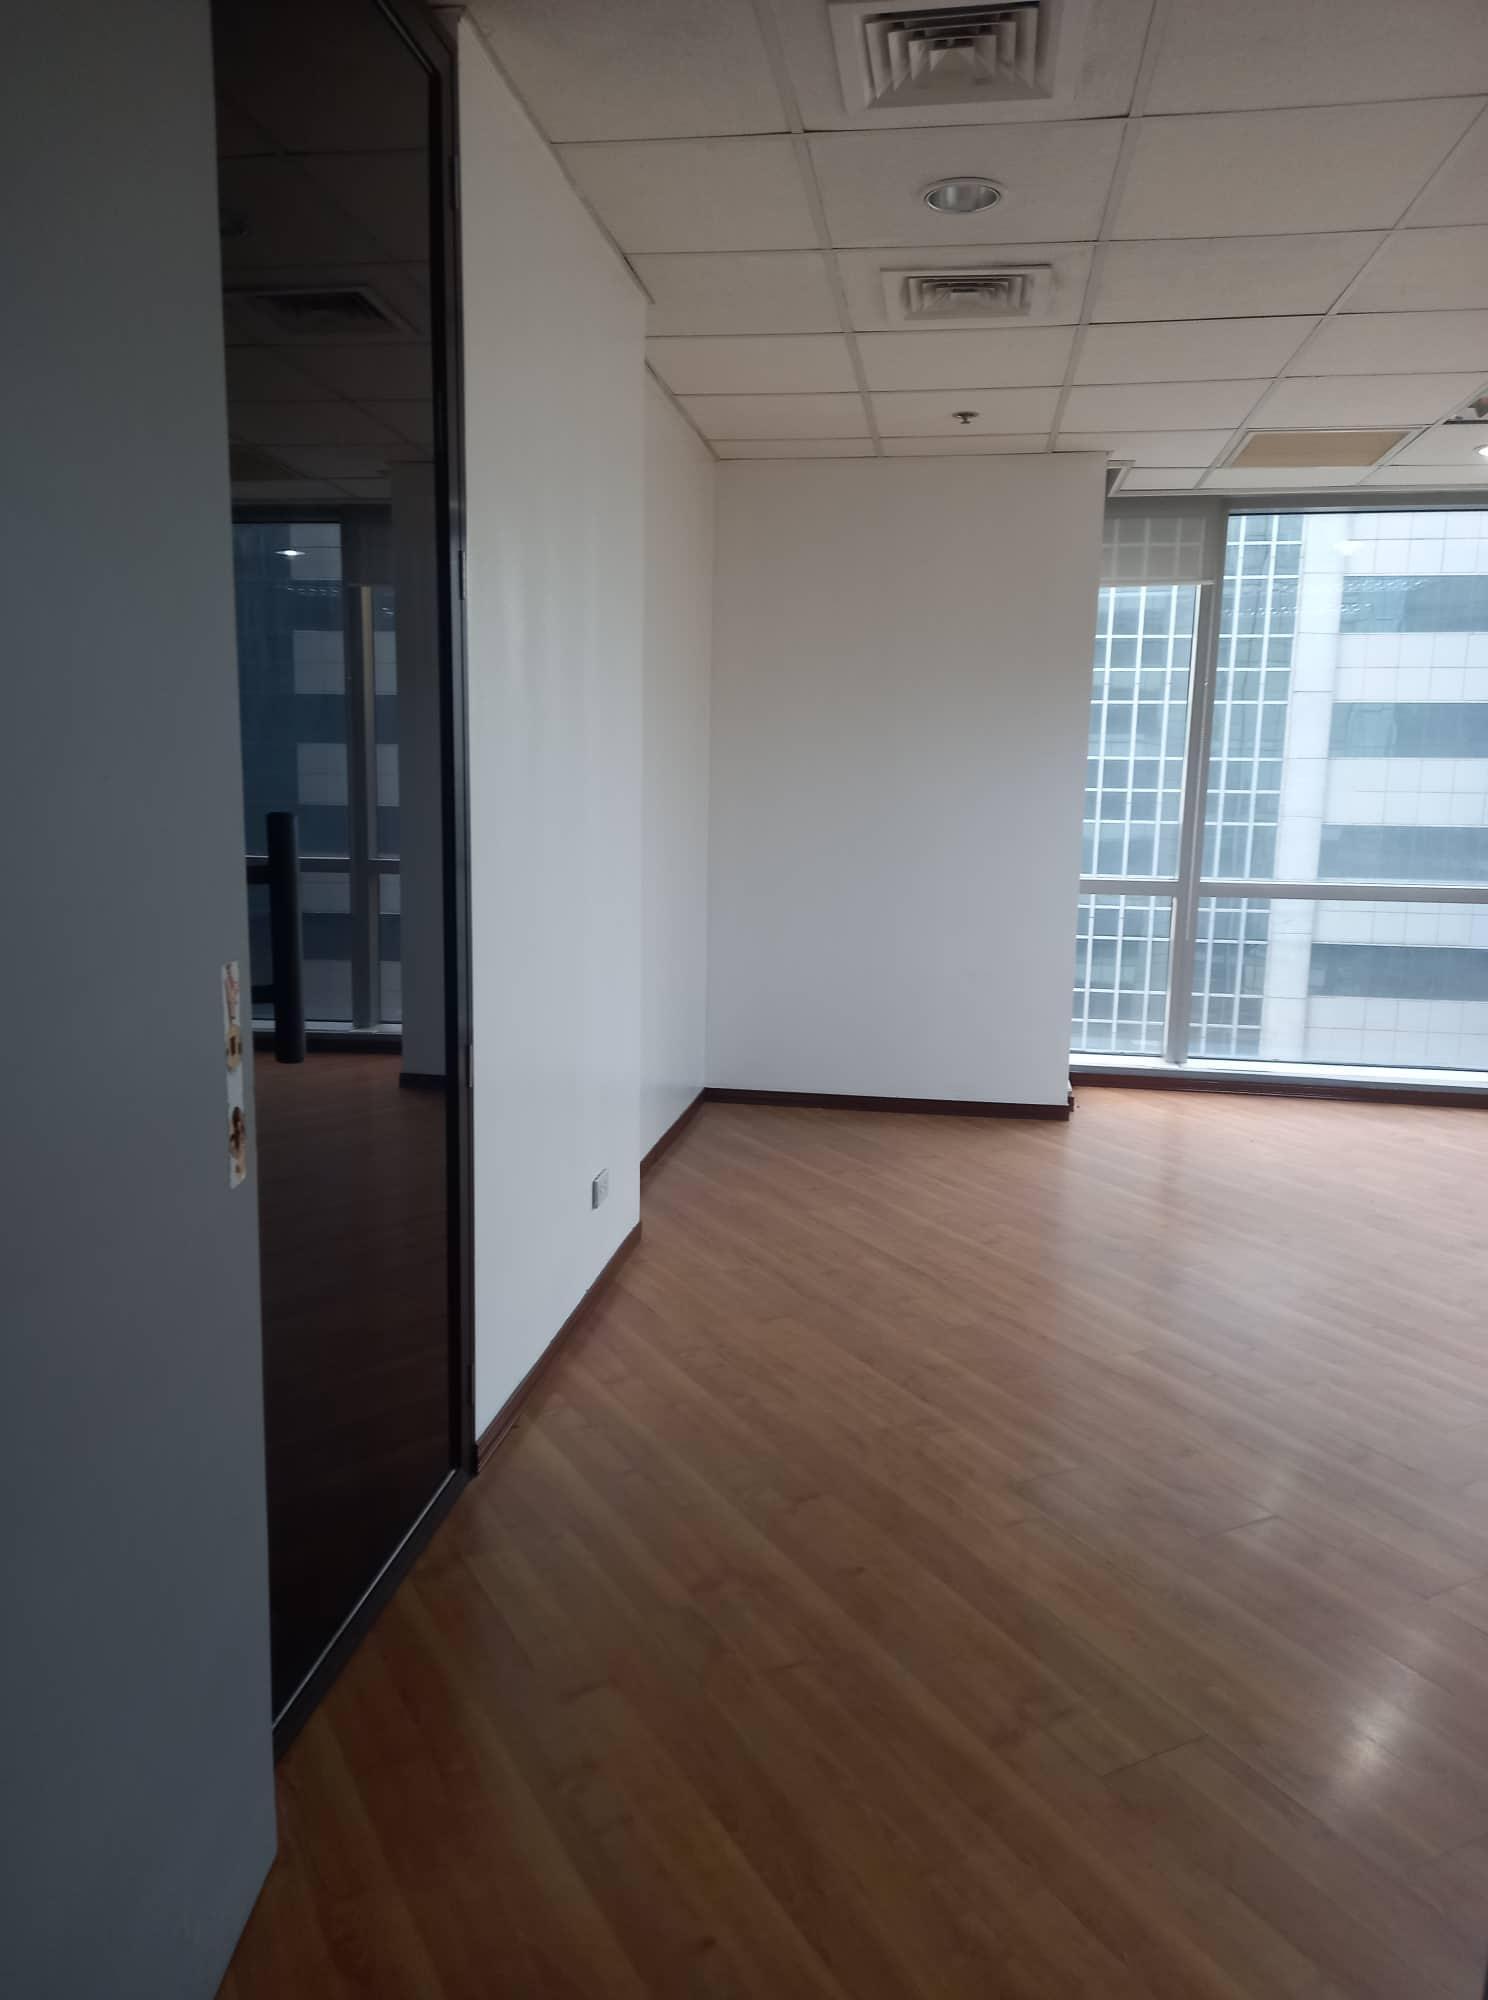 Office Space Rent Lease Fitted BPO PEZA Ortigas Center 324sqm